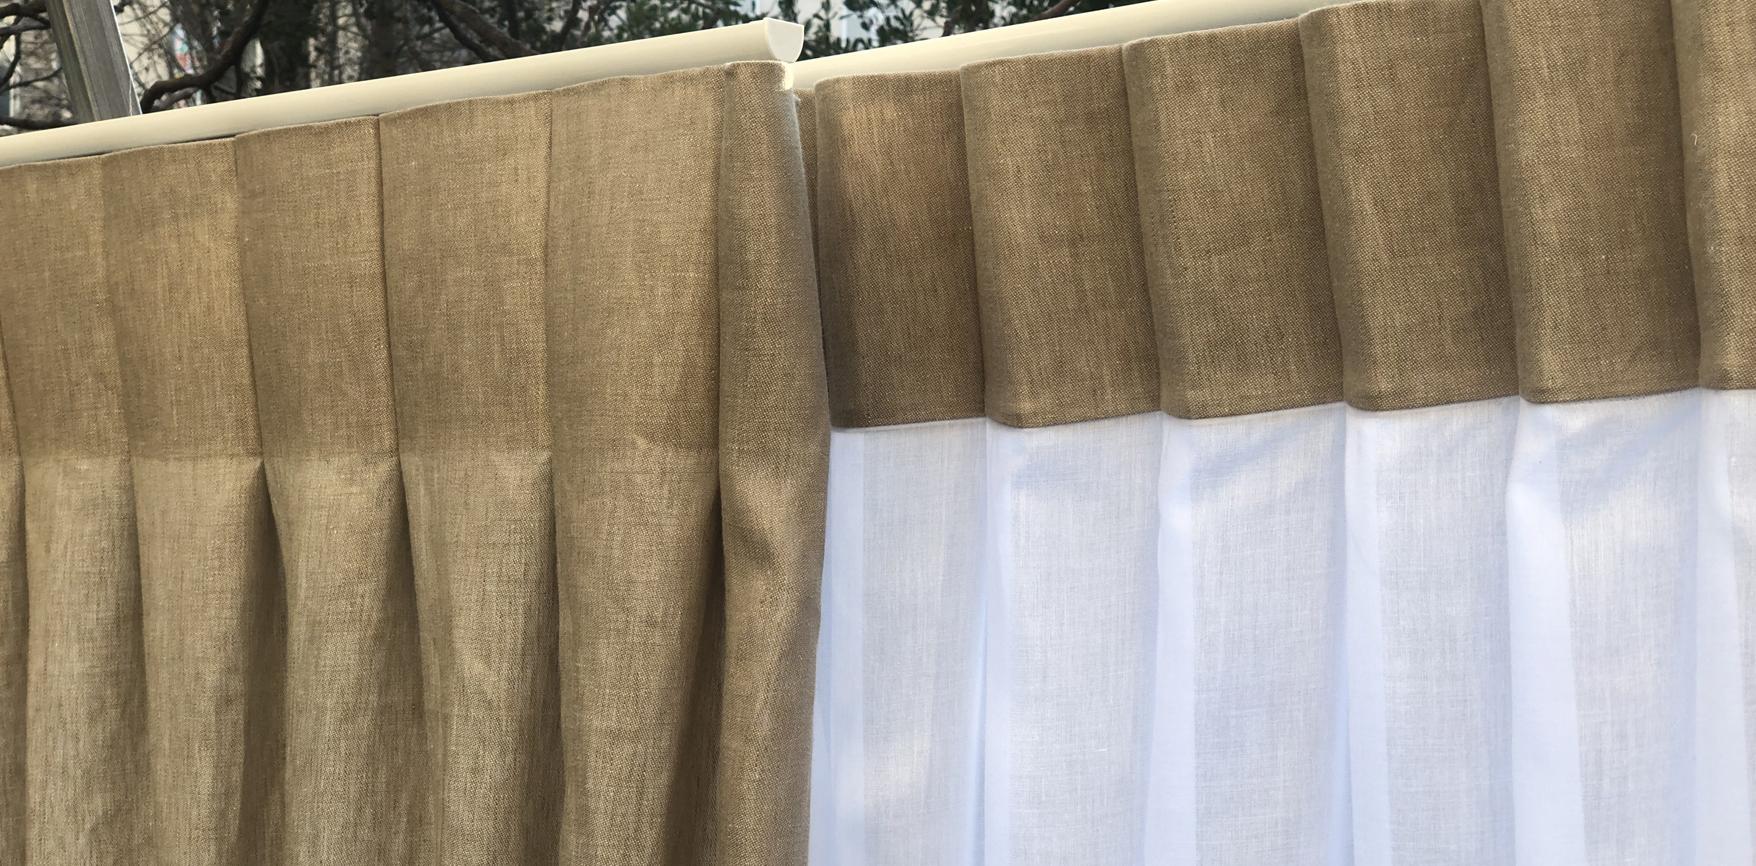 Generous and natural : back folds on rails, fabrics from Métaphores.